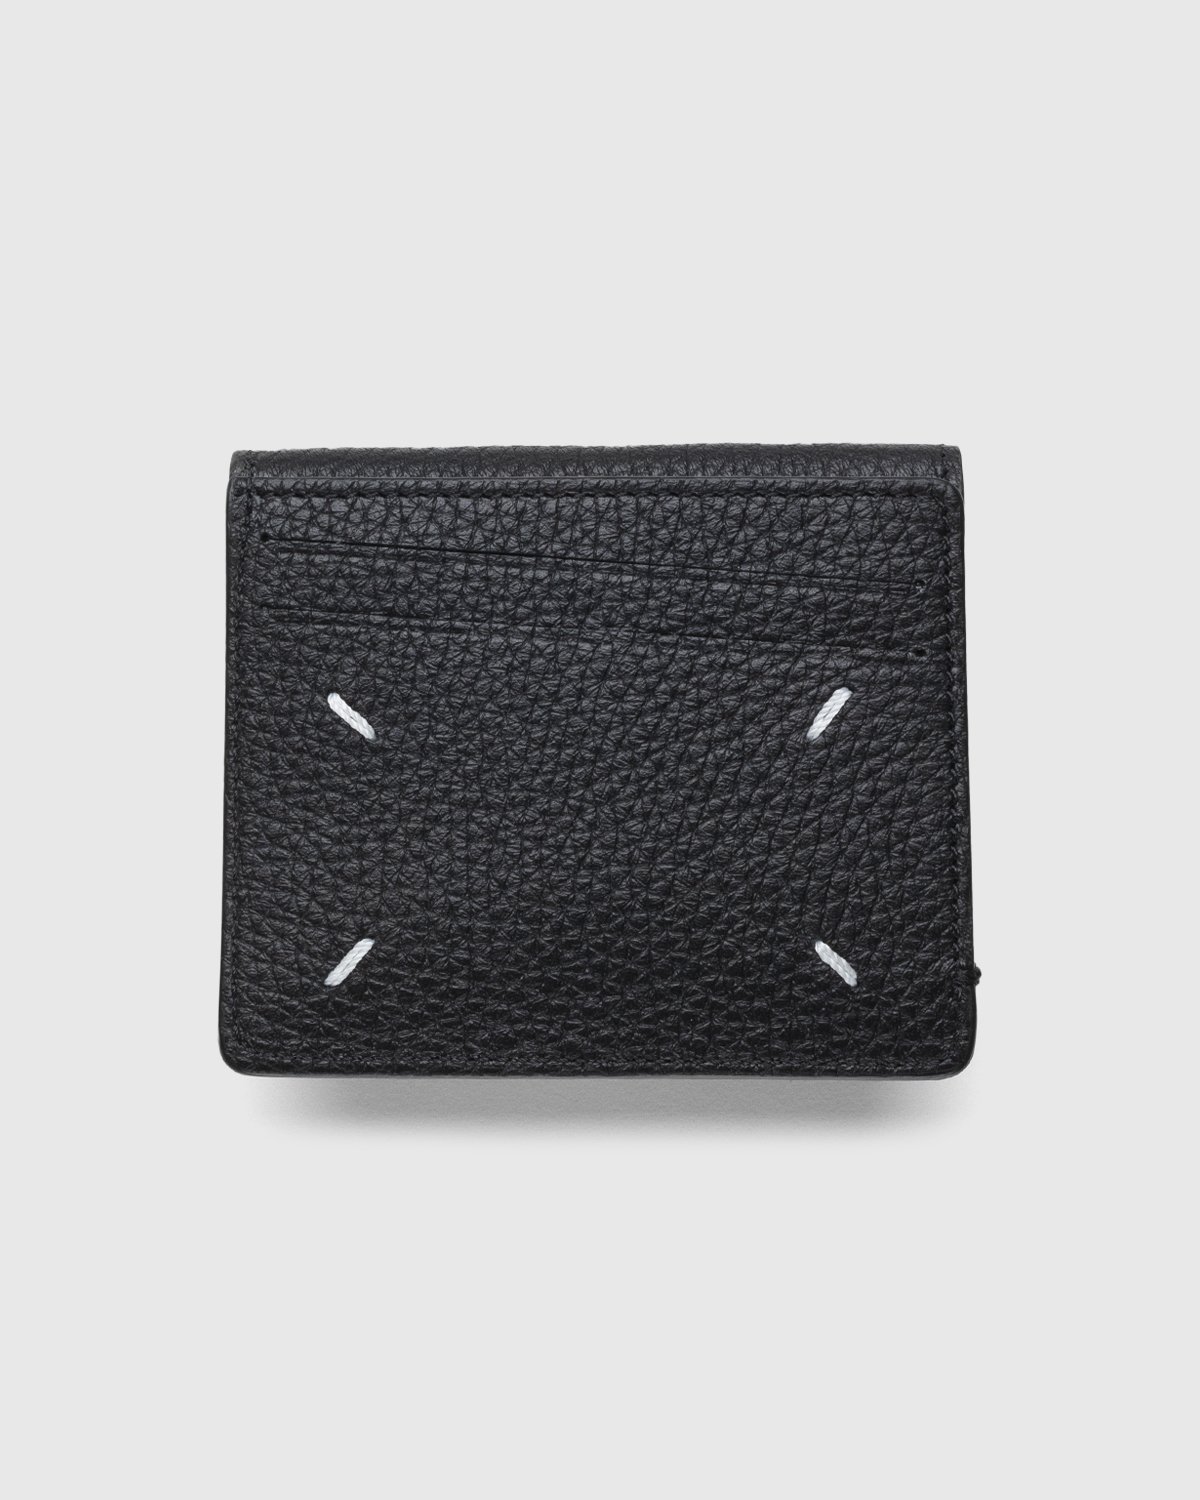 Maison Margiela - Coin and Card Holder Black - Accessories - Black - Image 2